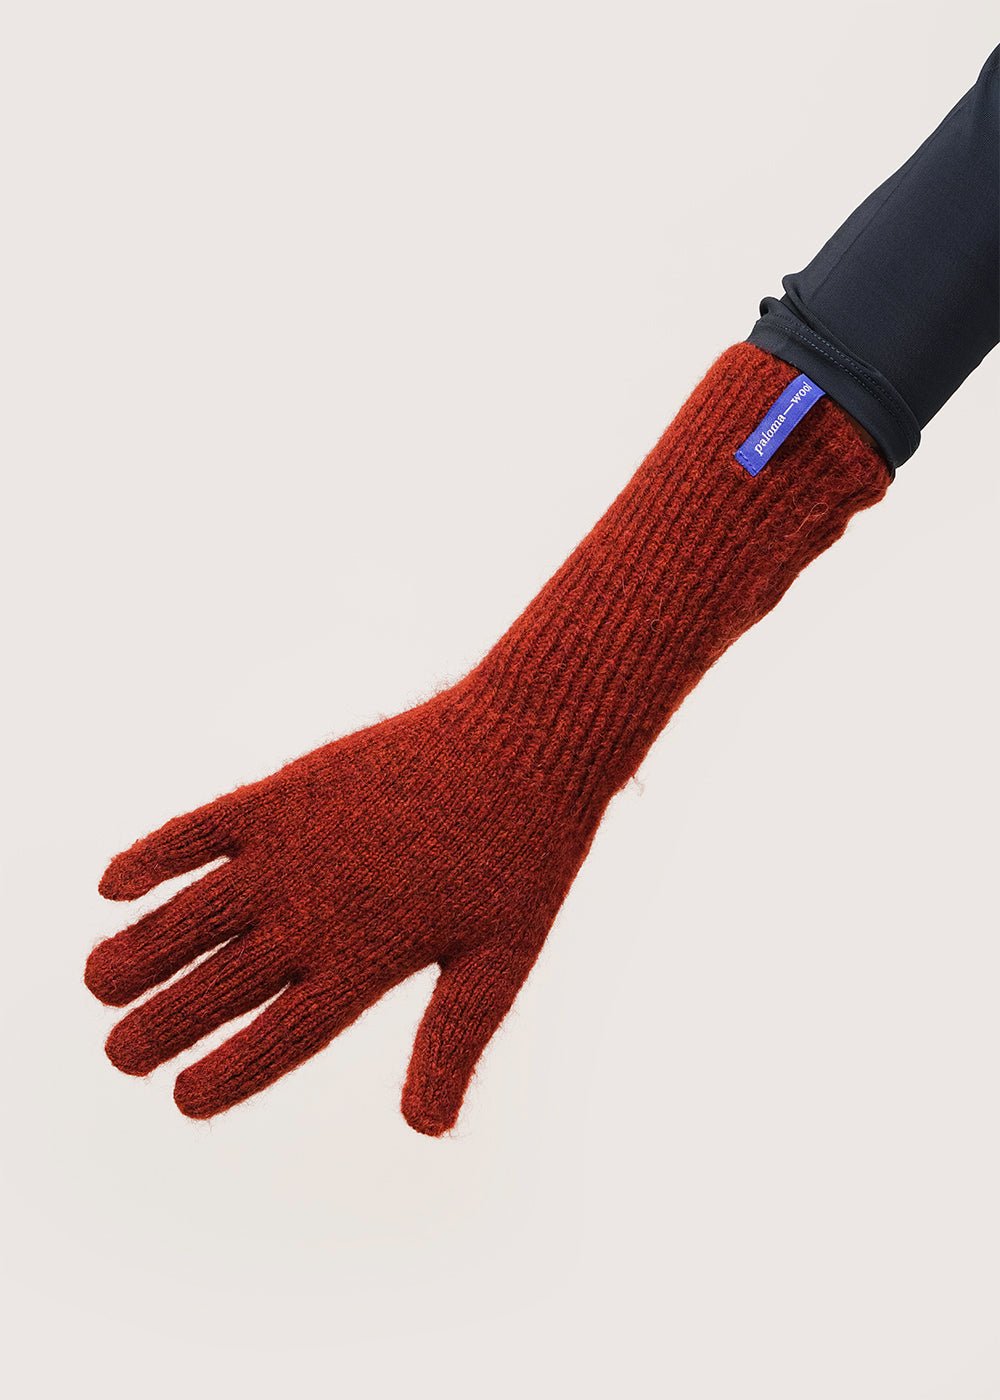 Peter Gloves in Wine by PALOMA WOOL